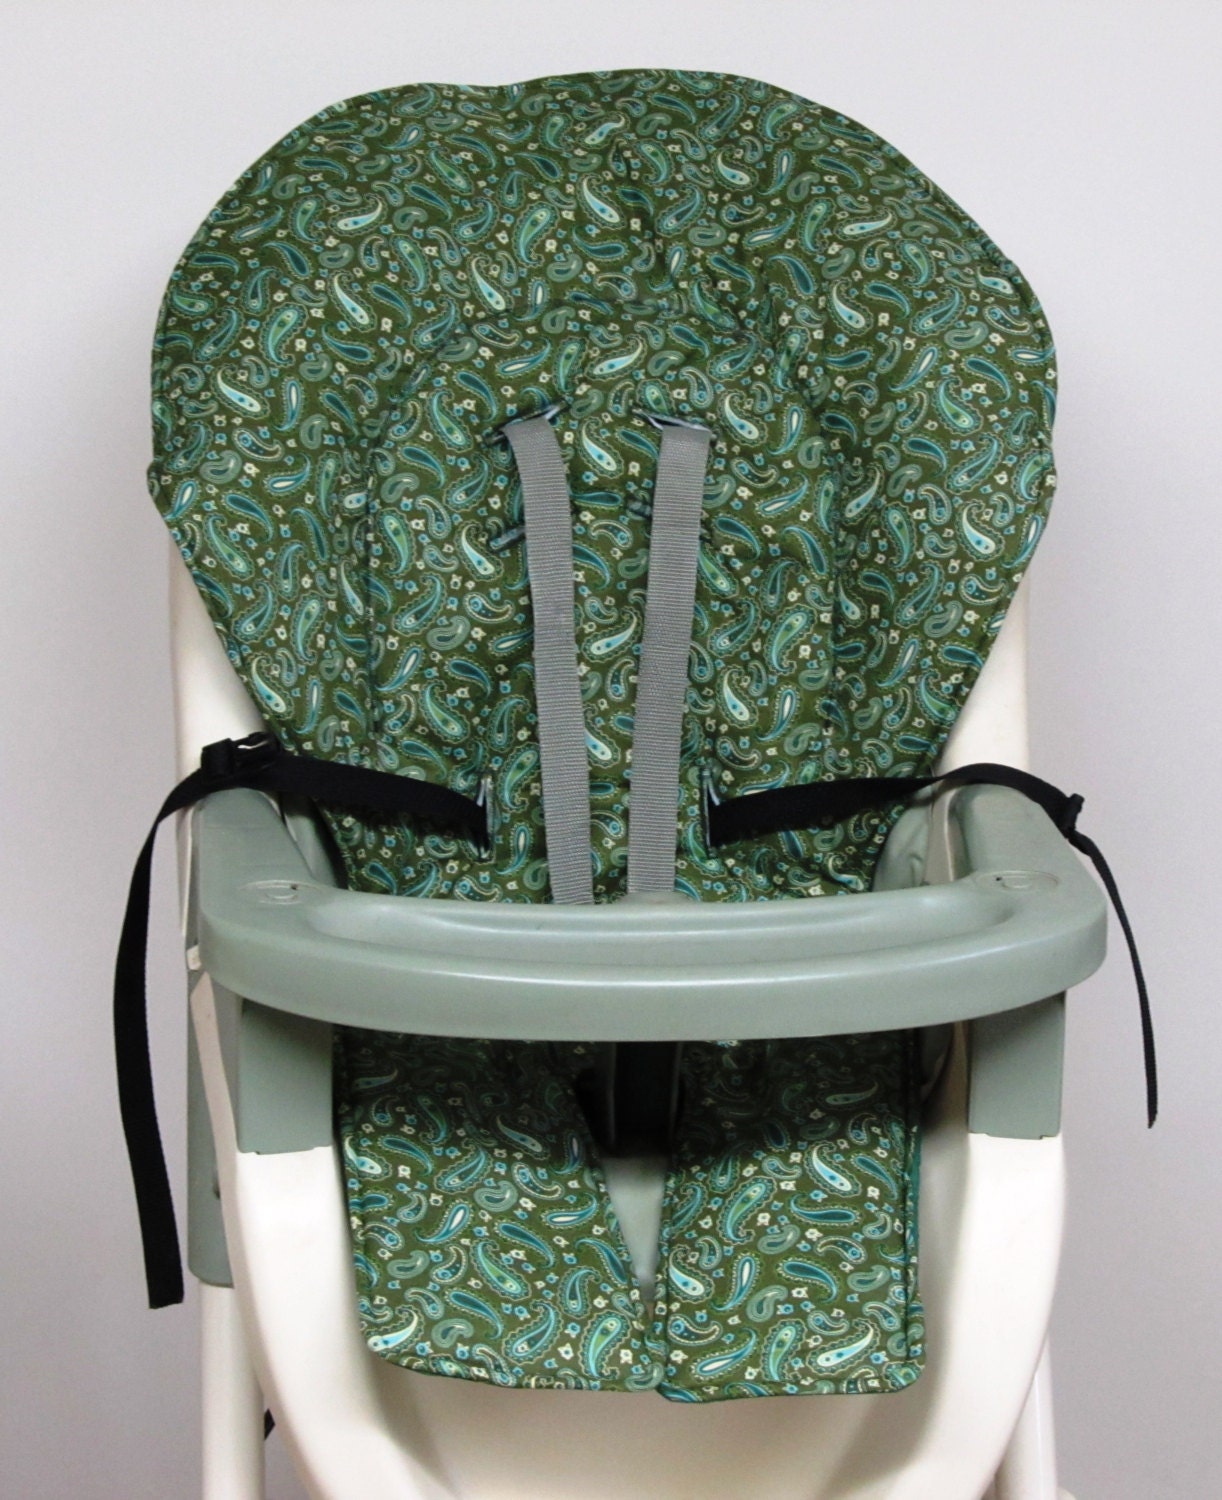 high chair Graco replacement padcoverolive green by sewingsilly